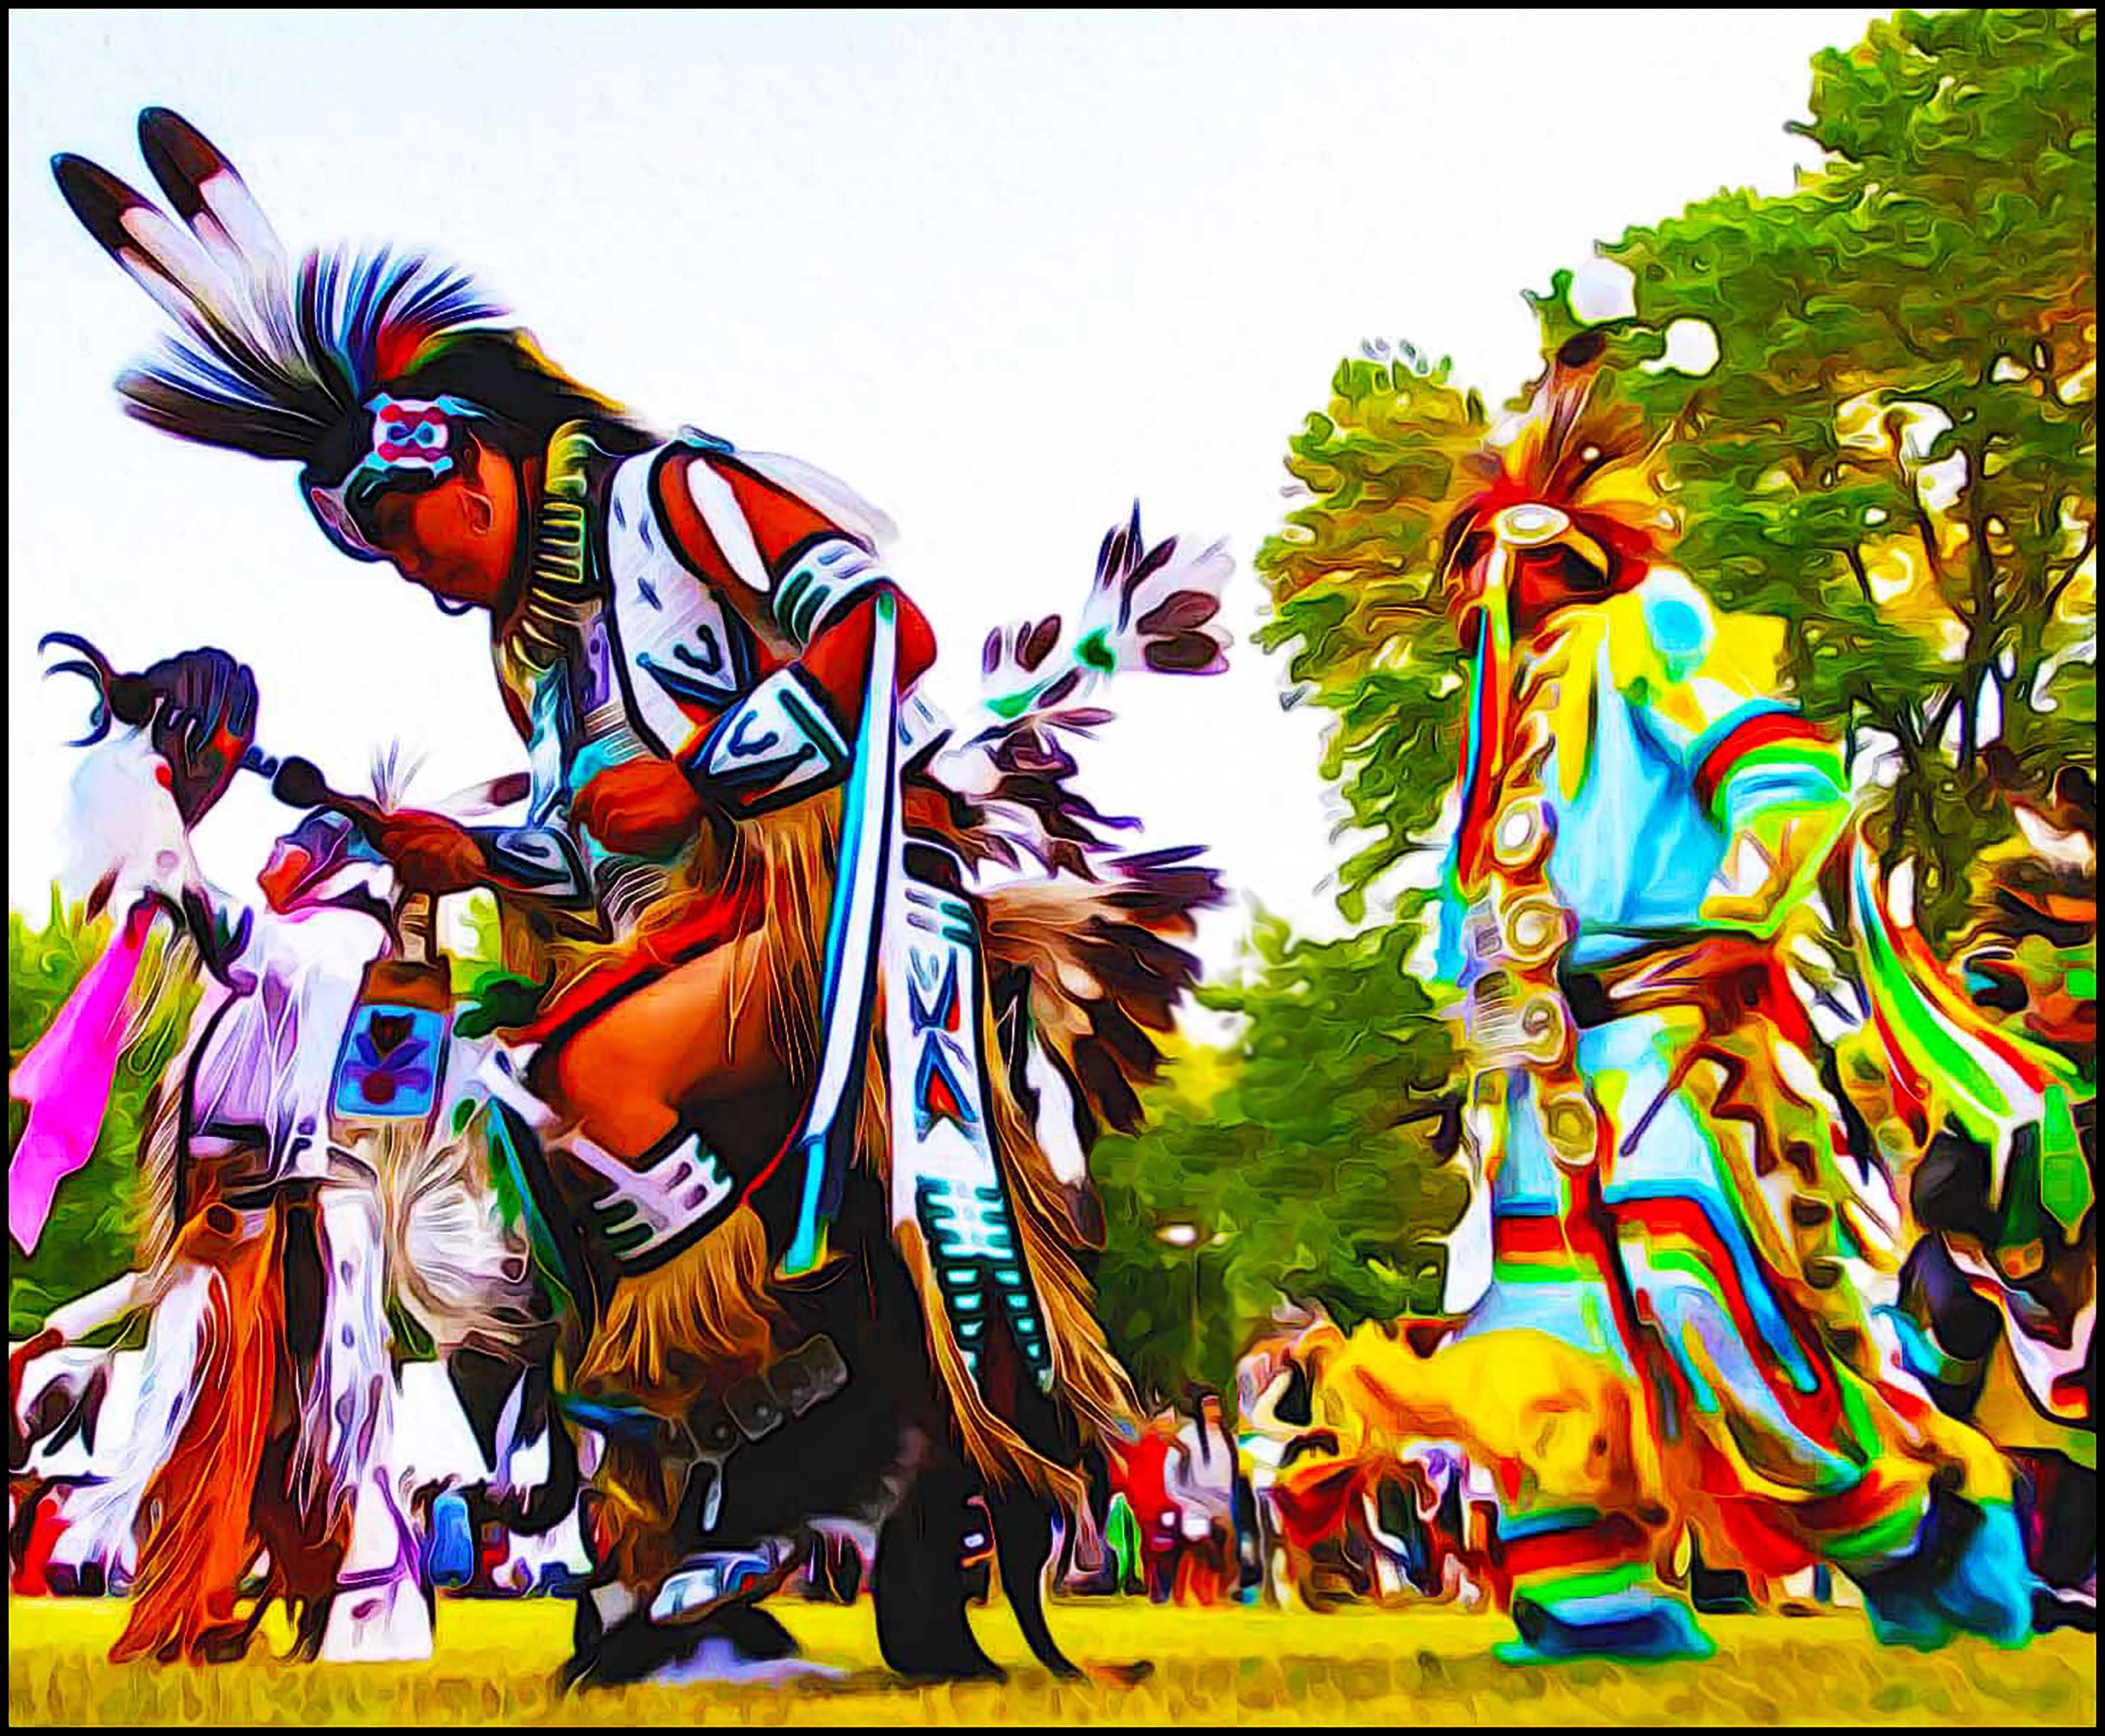 Milwaukee's Three First Nations
Over 7,000 Milwaukee County citizens identified as American Indian or Alaska Native on the 2010 census.